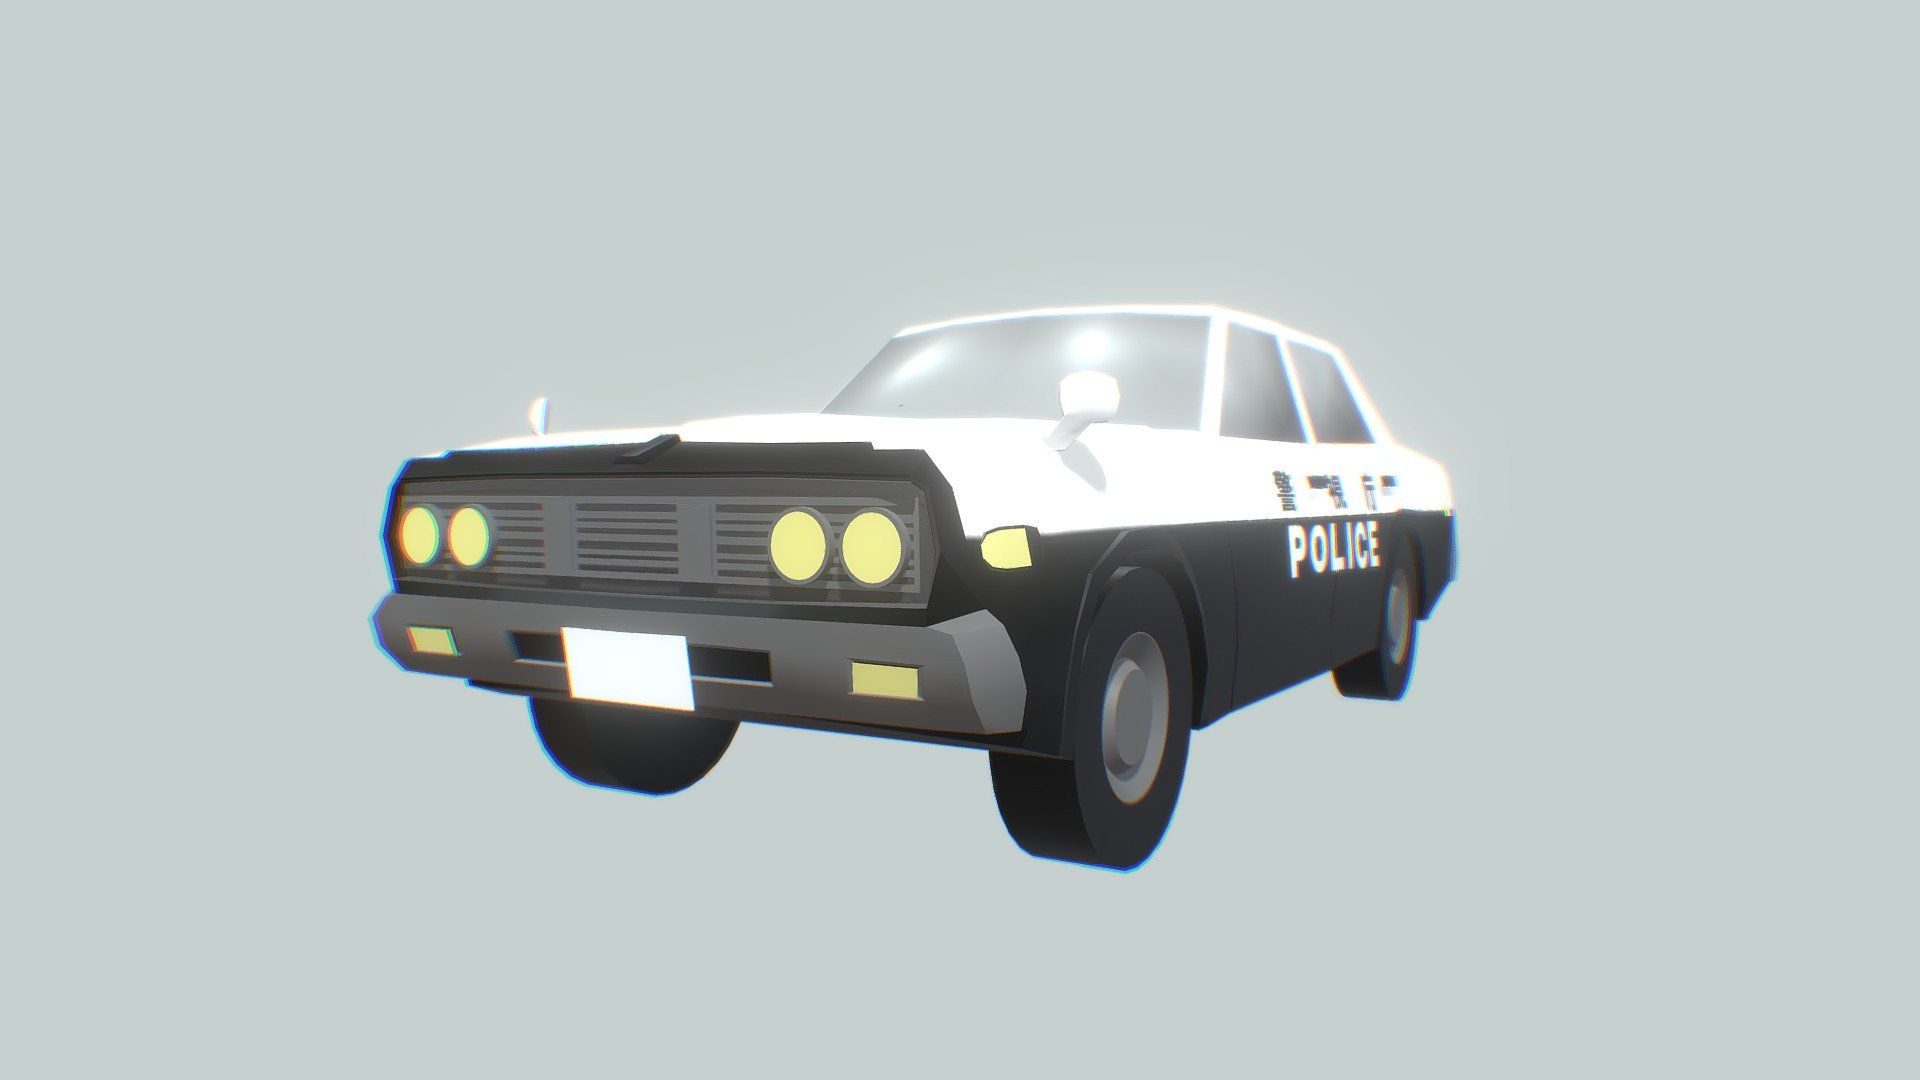 The car is divided into parts.
Is a blend. doc
with textures zip 3d model